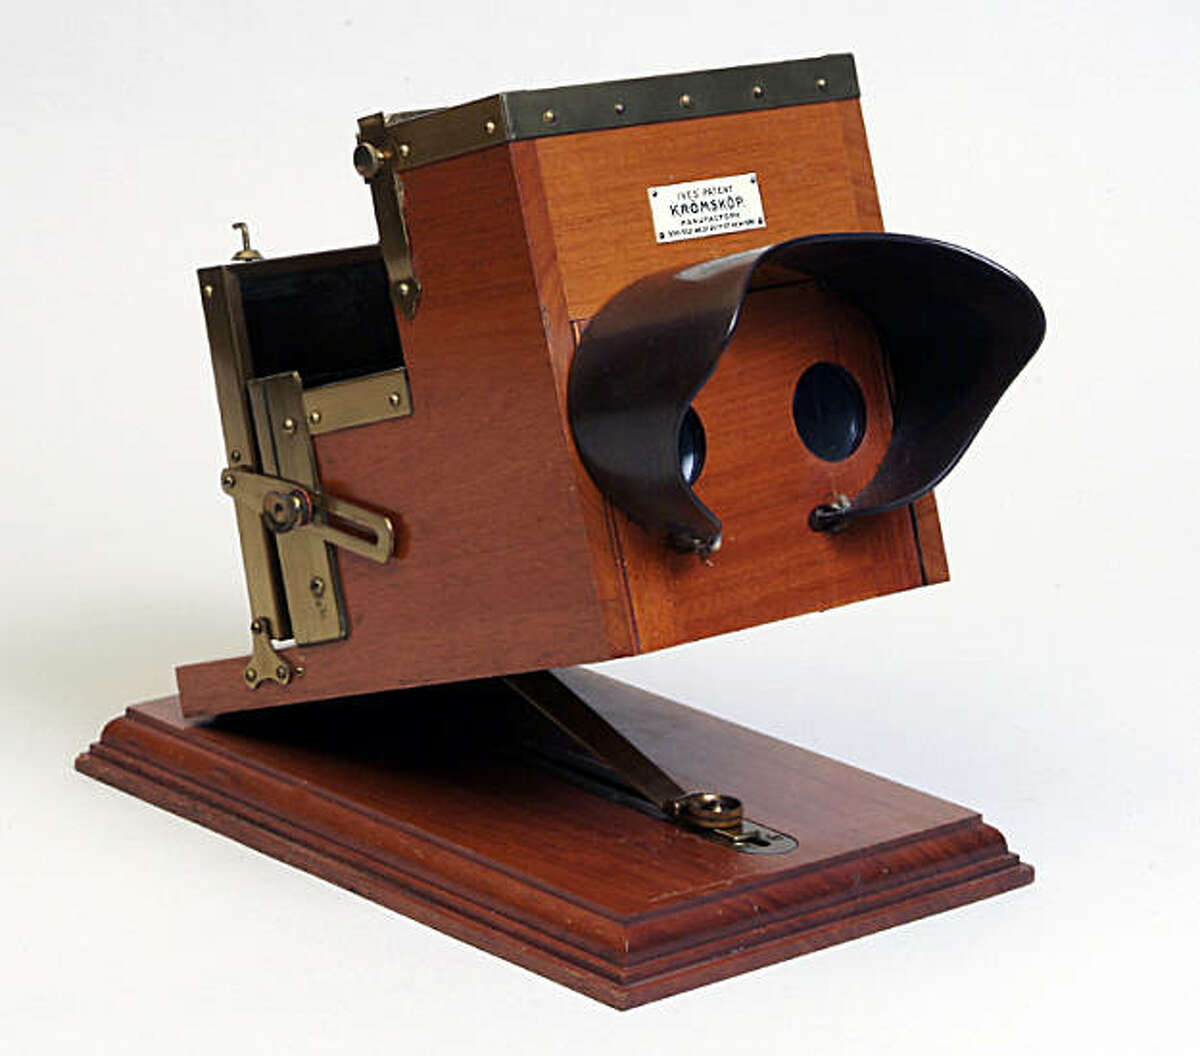 This is a photo of a kromoscope used by Frederick Eugene Ives to take color photos of San Francisco after the earthquake in 1906.